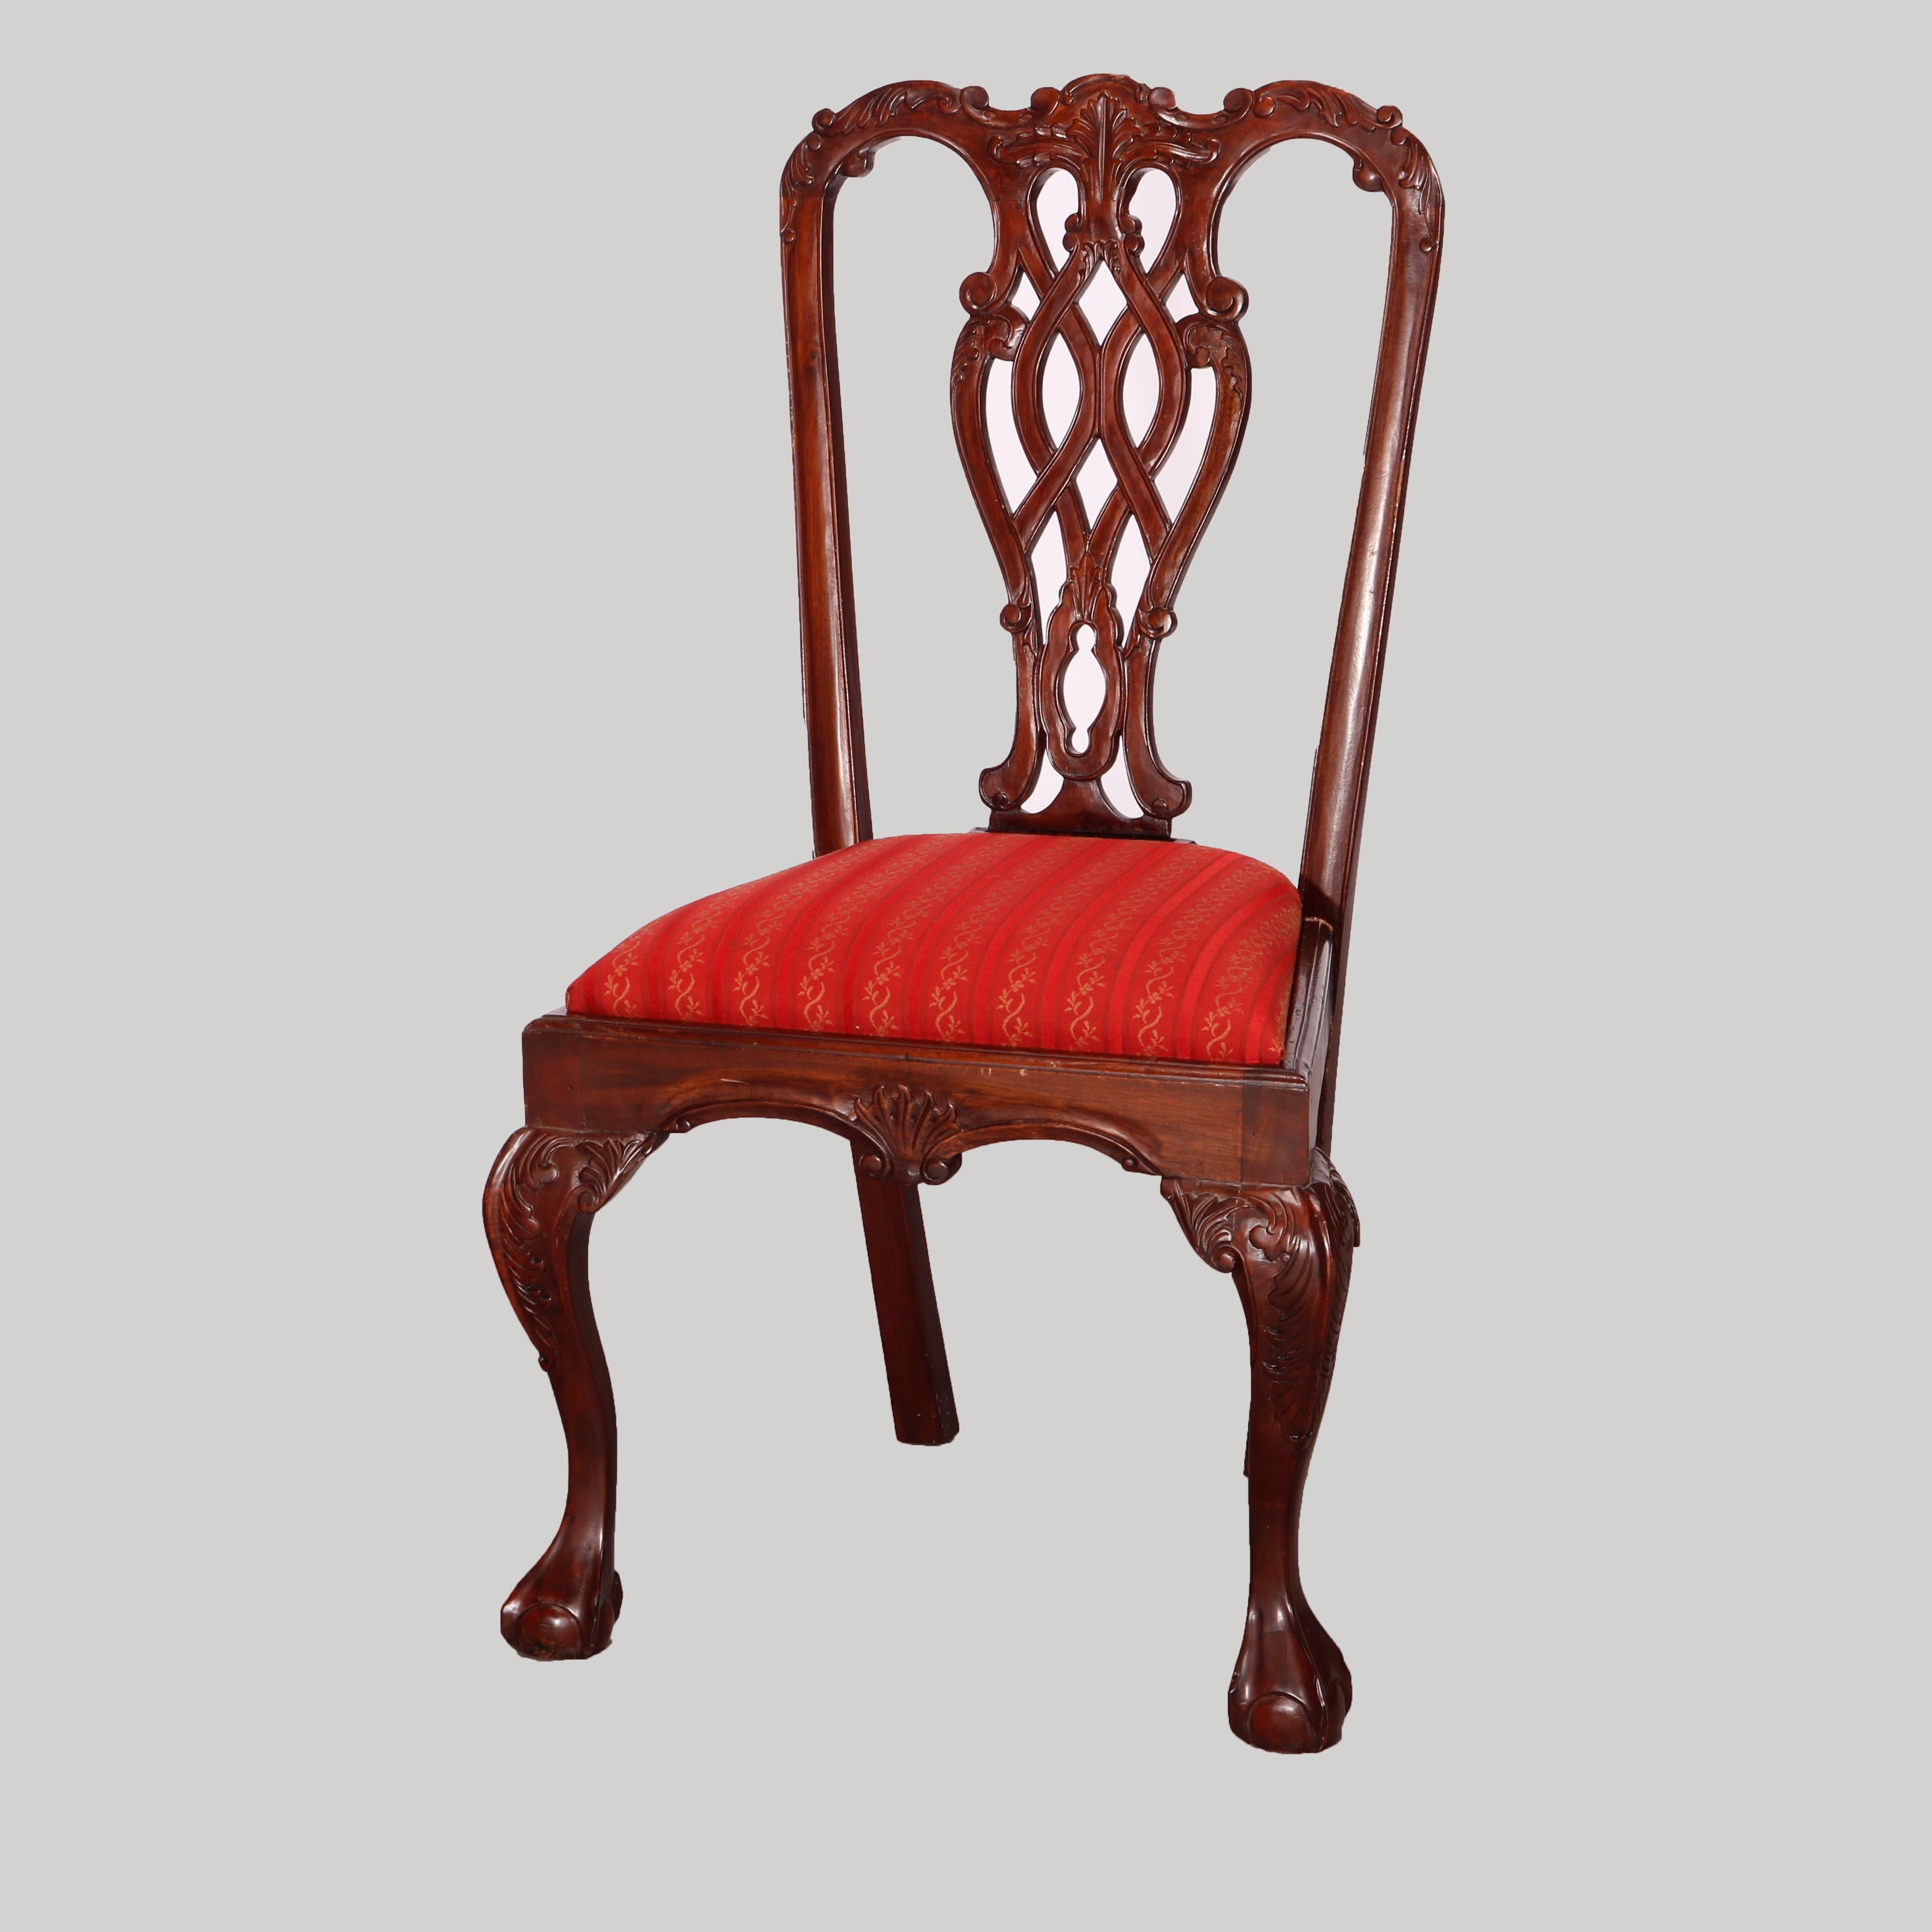 A set of six Federal or Chippendale style dining room chairs offer carved mahogany ribbon backs with foliate elements over upholstered seats and raised on cabriole legs having scrolled acanthus knees and terminating in claw and ball feet, 20th